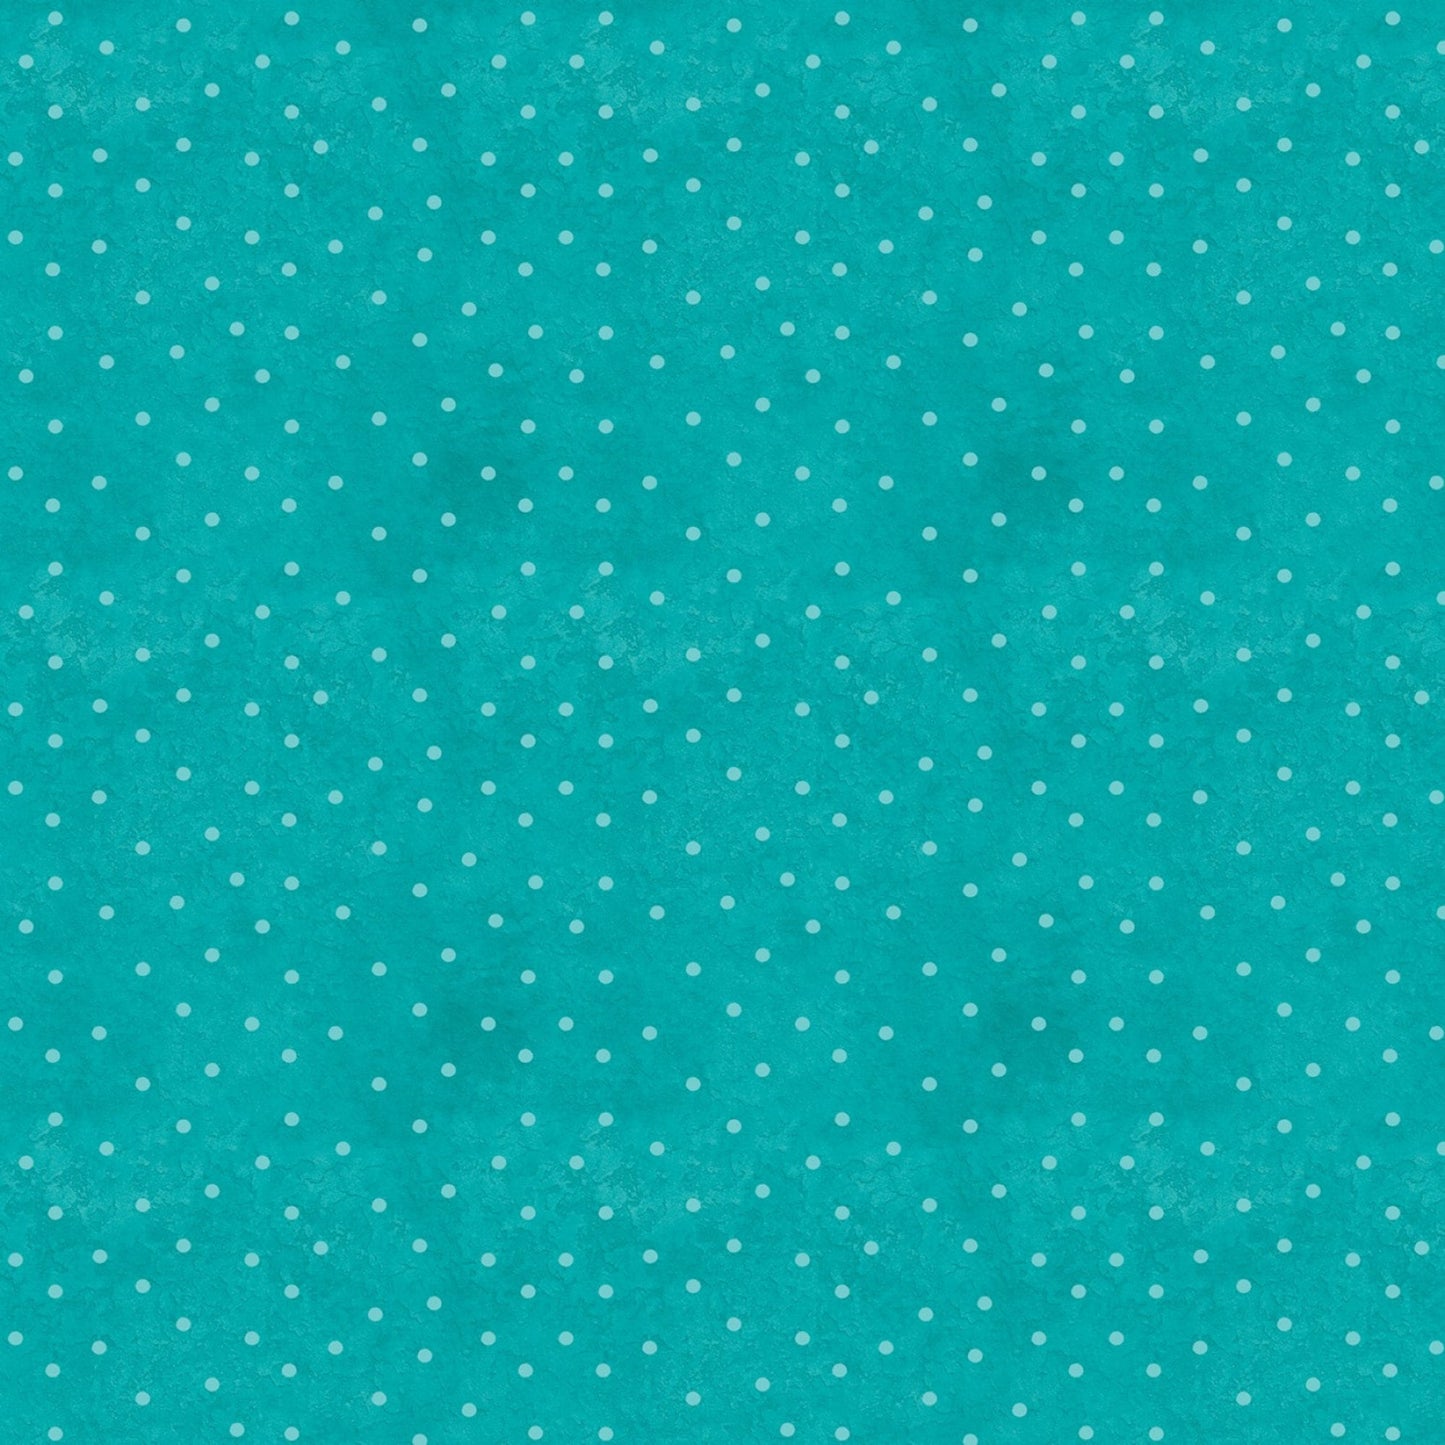 Wilmington Prints Blue / FQ (18"x21") Dots all over yellow or dots all over teal Fabric by the Yard from Wilmington Prints Sunflower Sweet by Lisa Audit